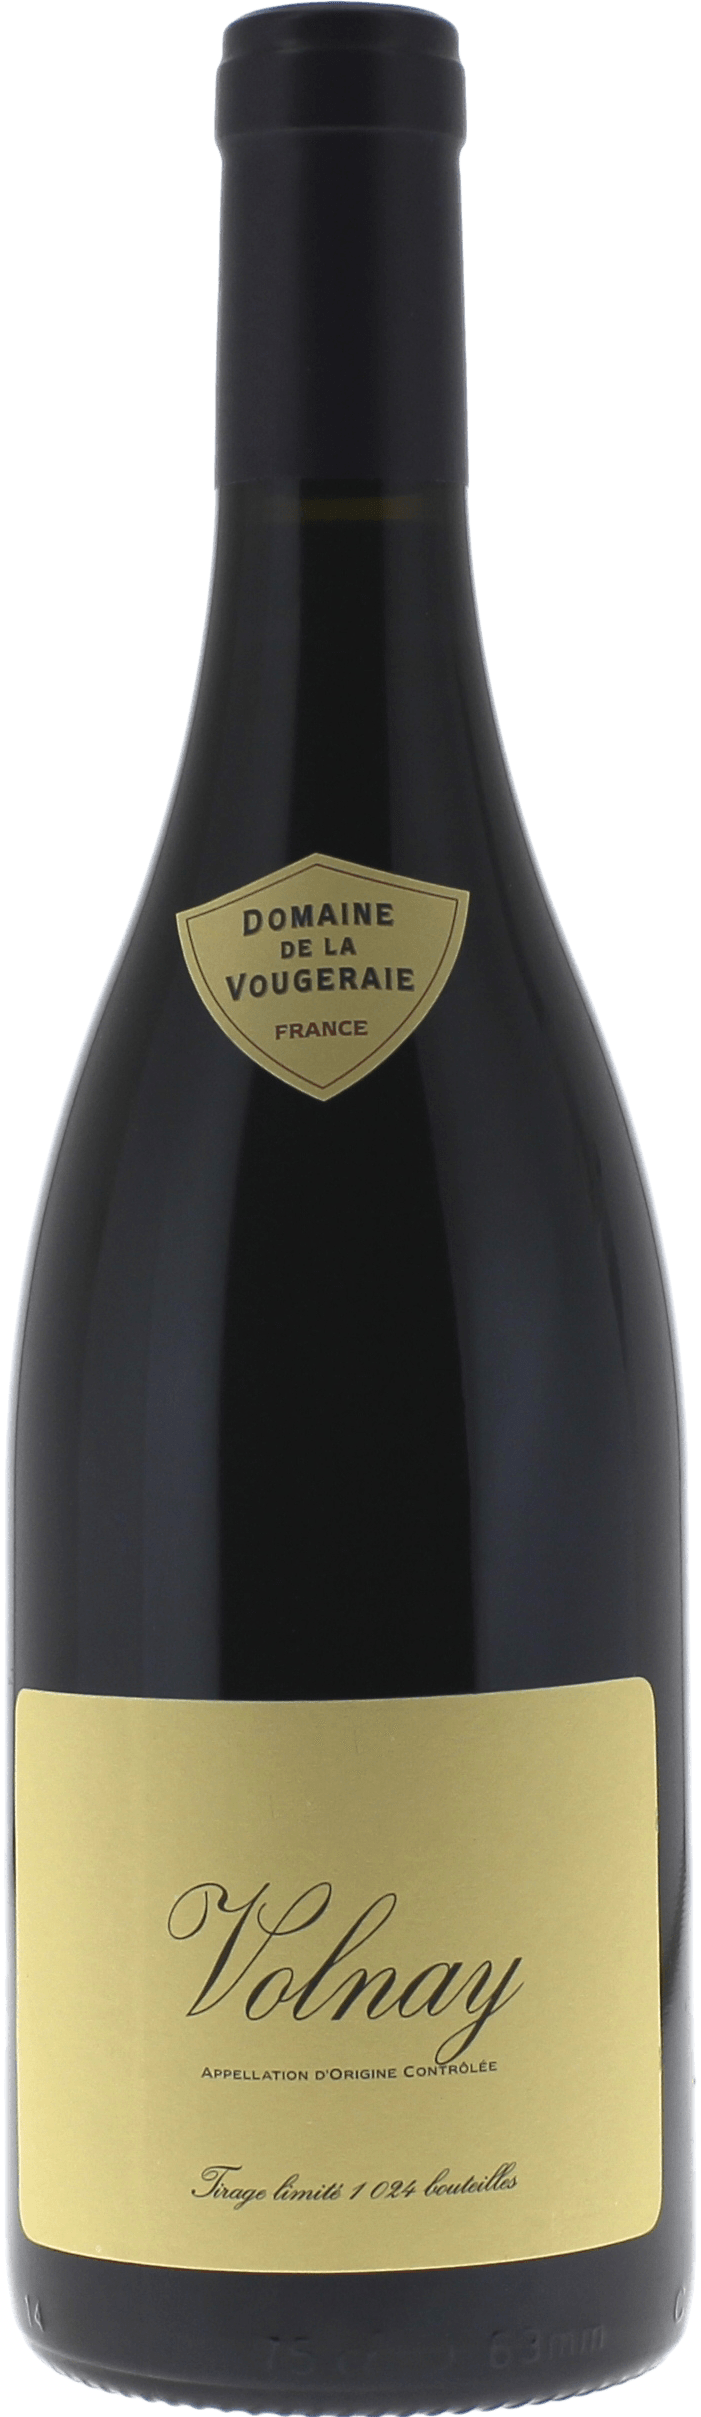 Volnay 2017 Domaine VOUGERAIE, Bourgogne rouge